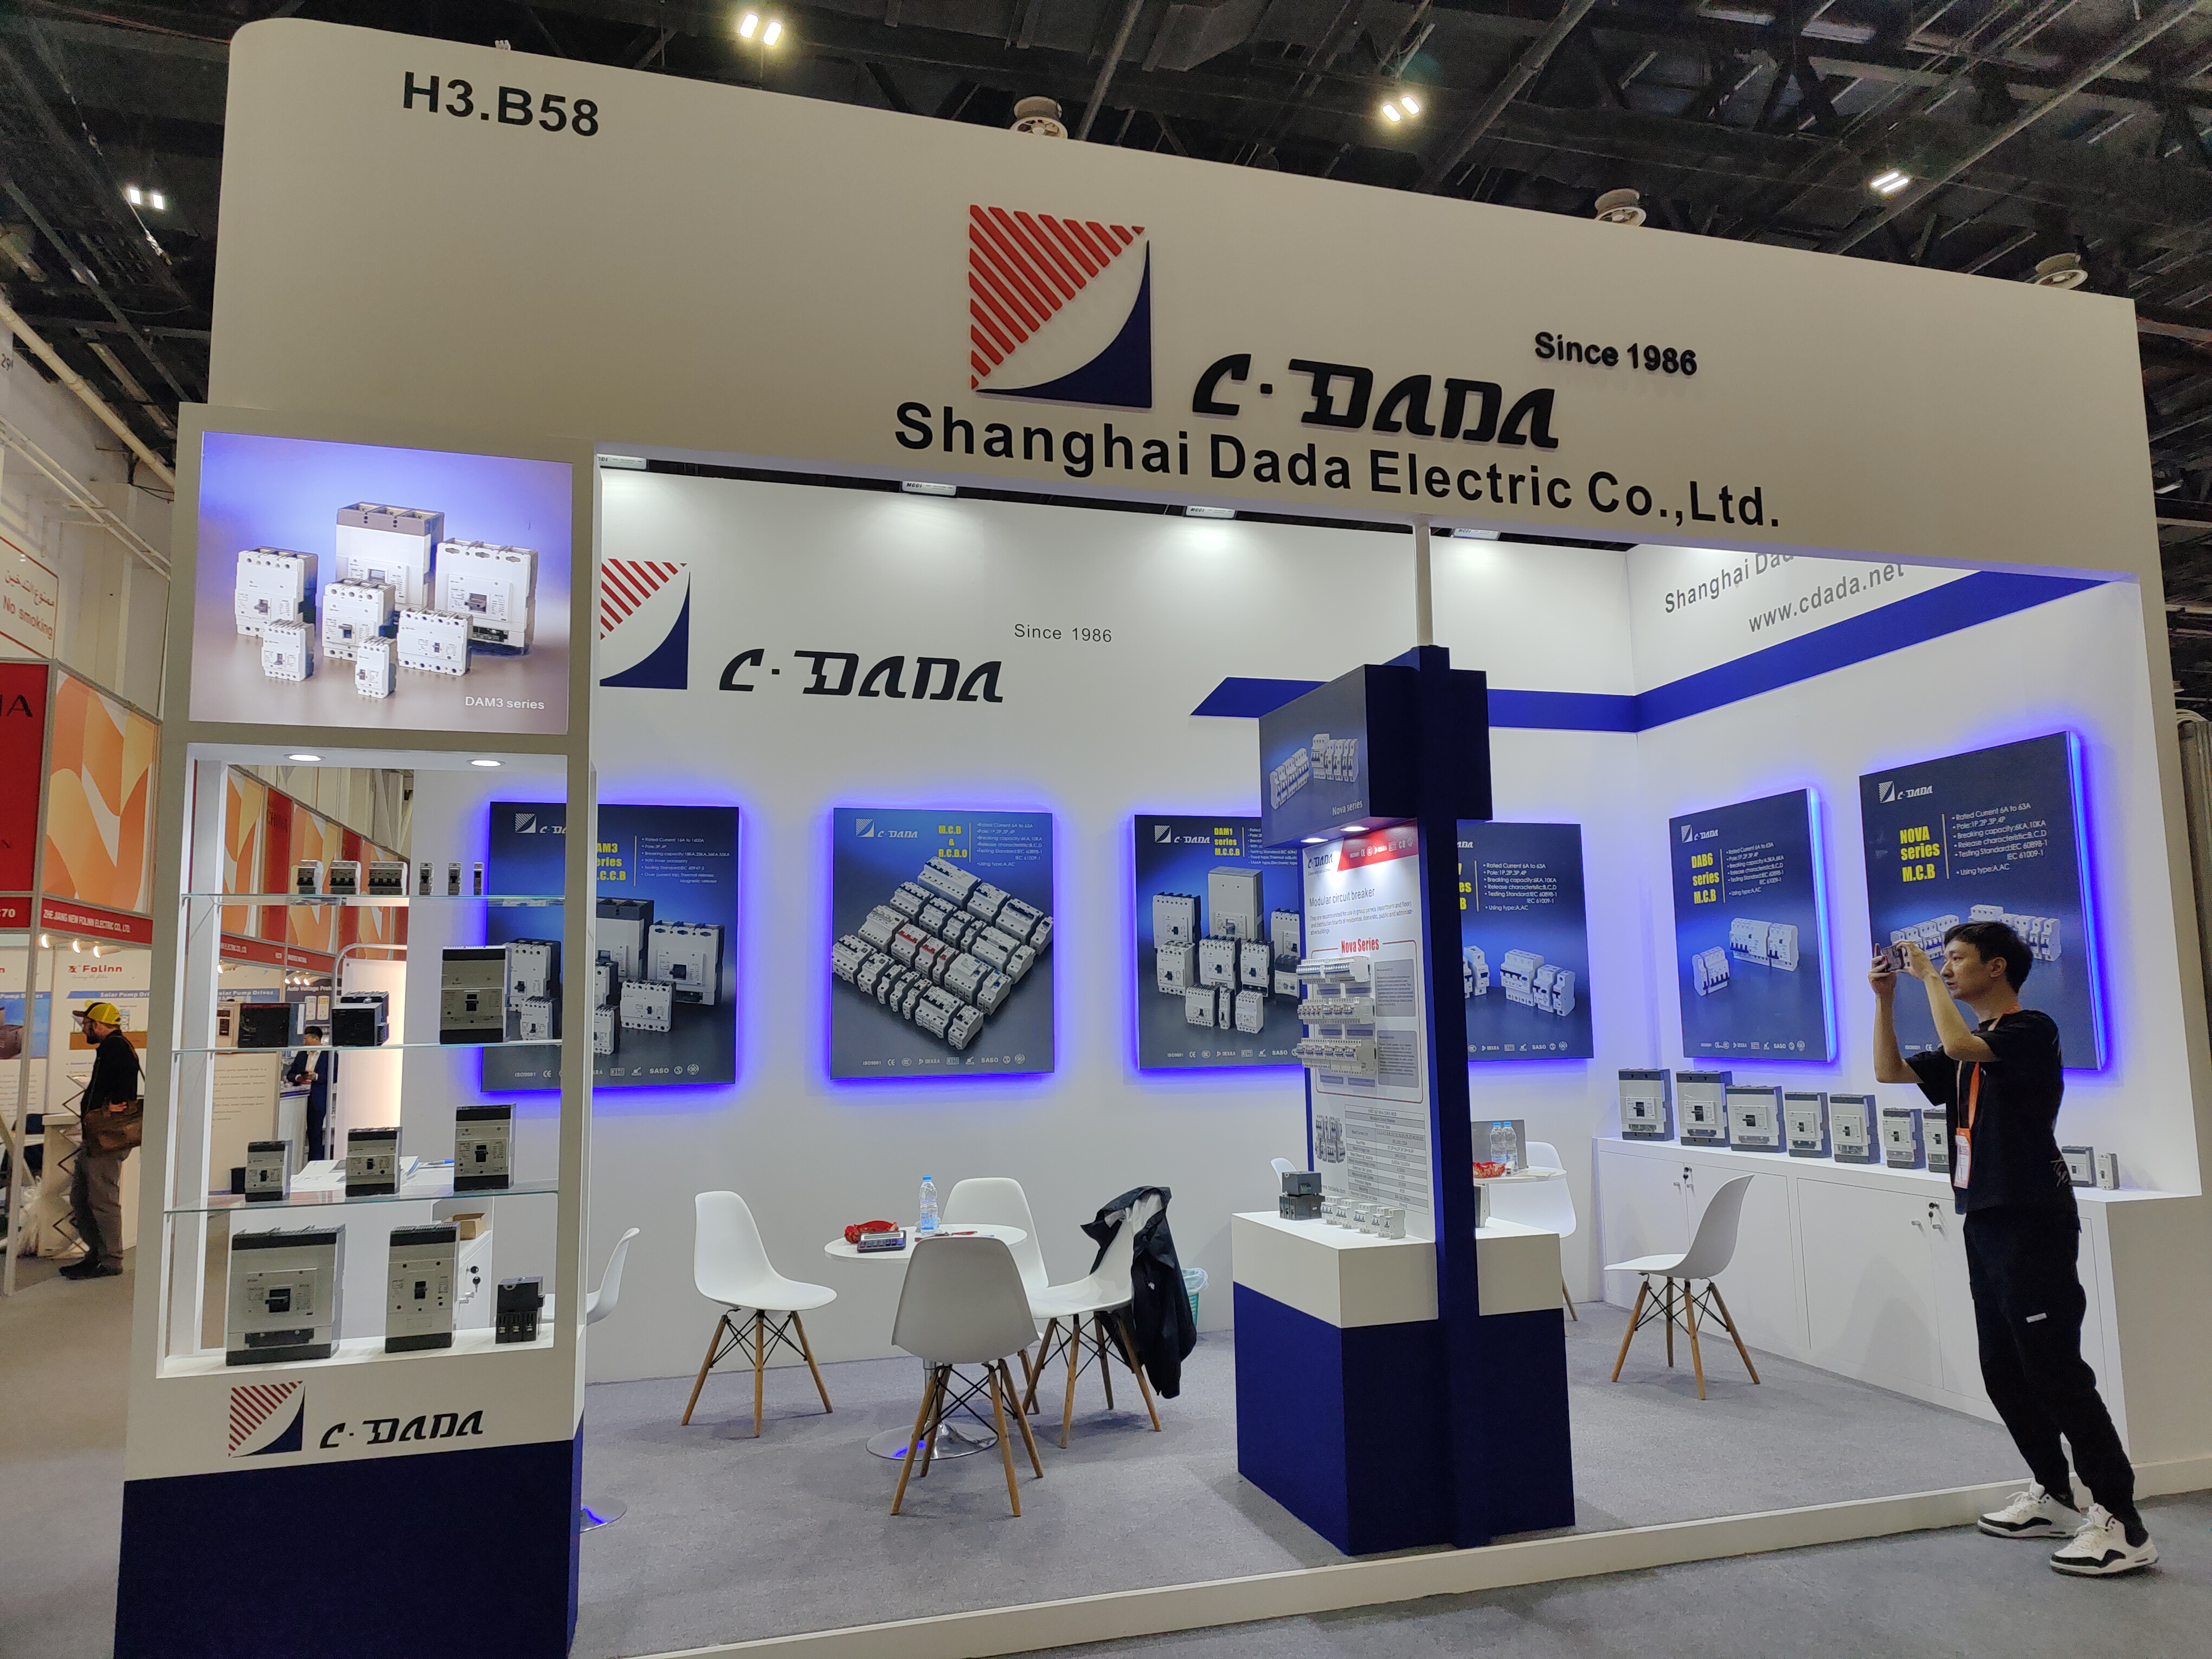 Middle East Energy (MEE) Welcomes DaDa Company’s Exhibition Experience and Emphasizes on the Importance of MCCBs and Accessories